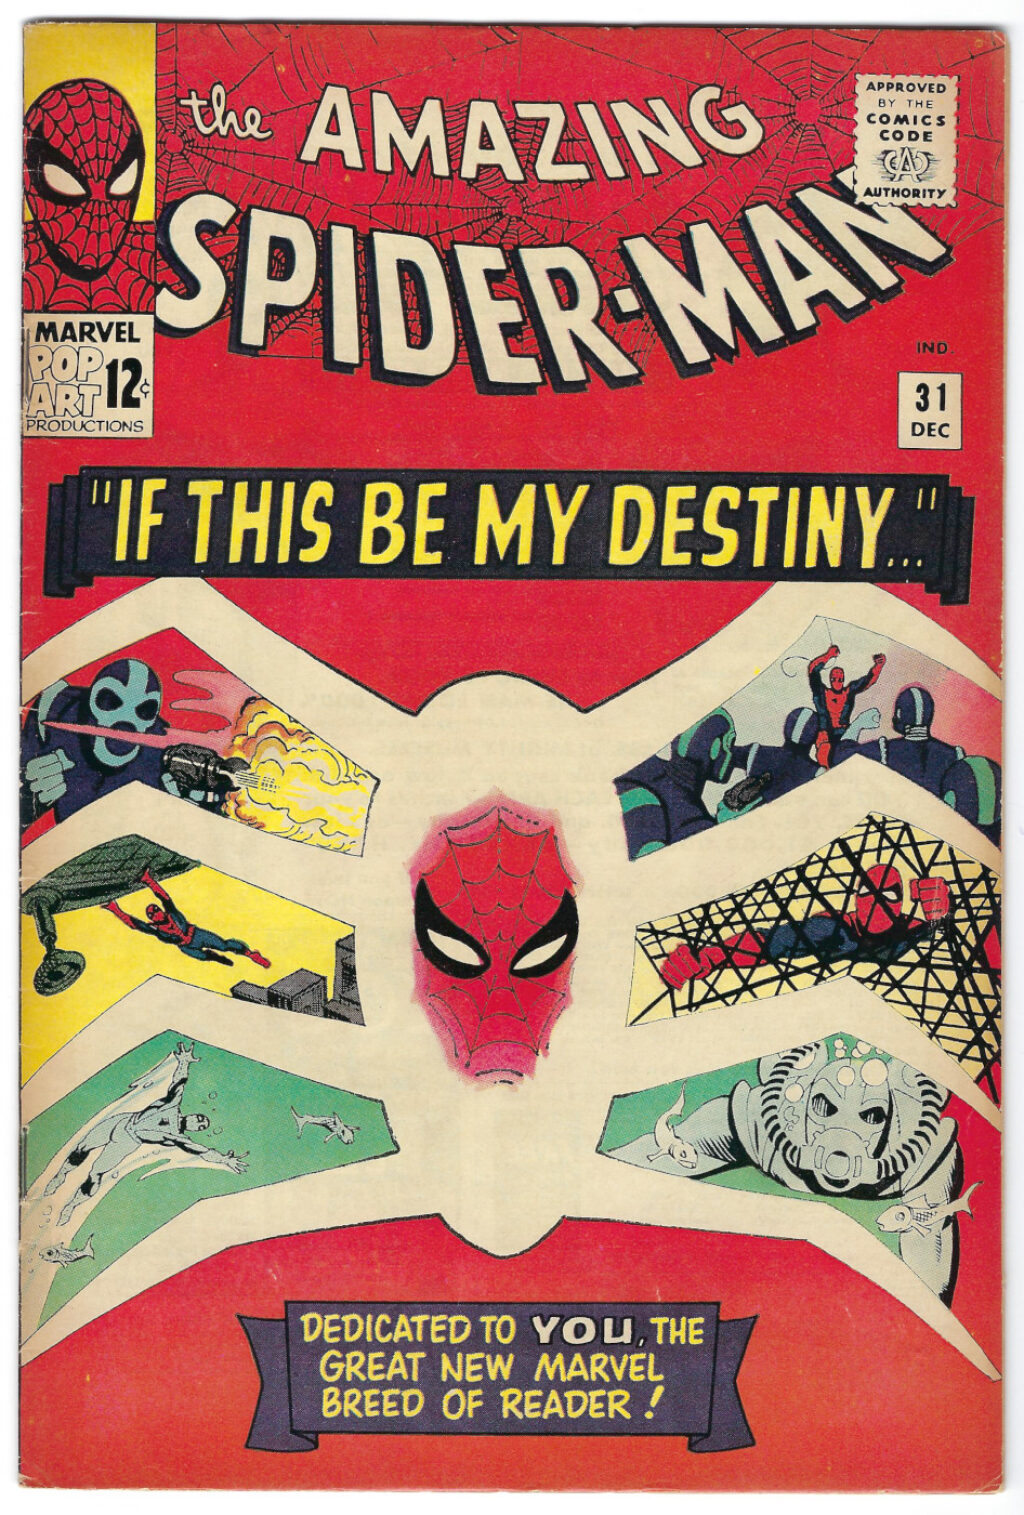 Marvel Comics Amazing Spider-Man (1963) #31: 1st Appearance of Gwen Stacy and Harry Osborn 1